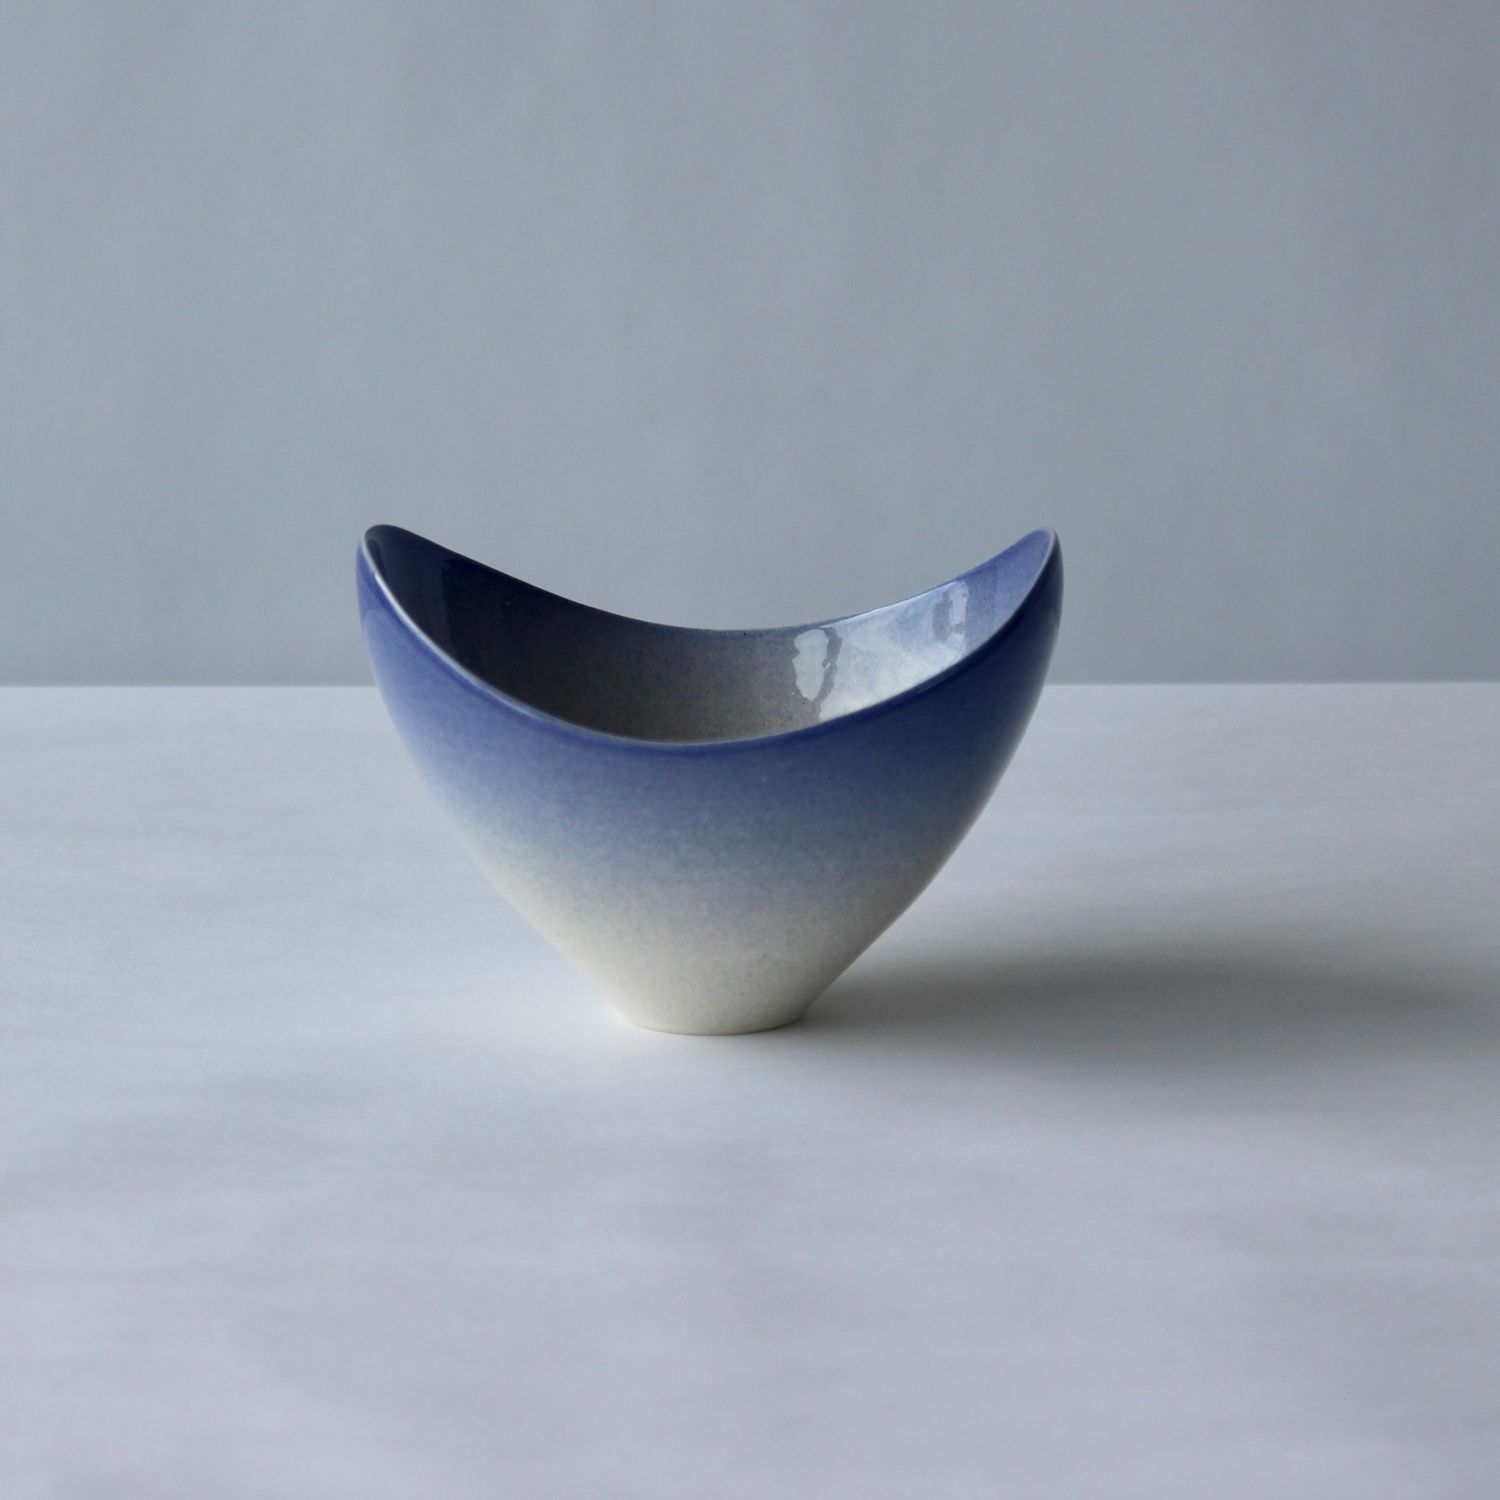 Annika Hoefs: Small Curved Edge Bowl – Blue & White Product Image 1 of 1